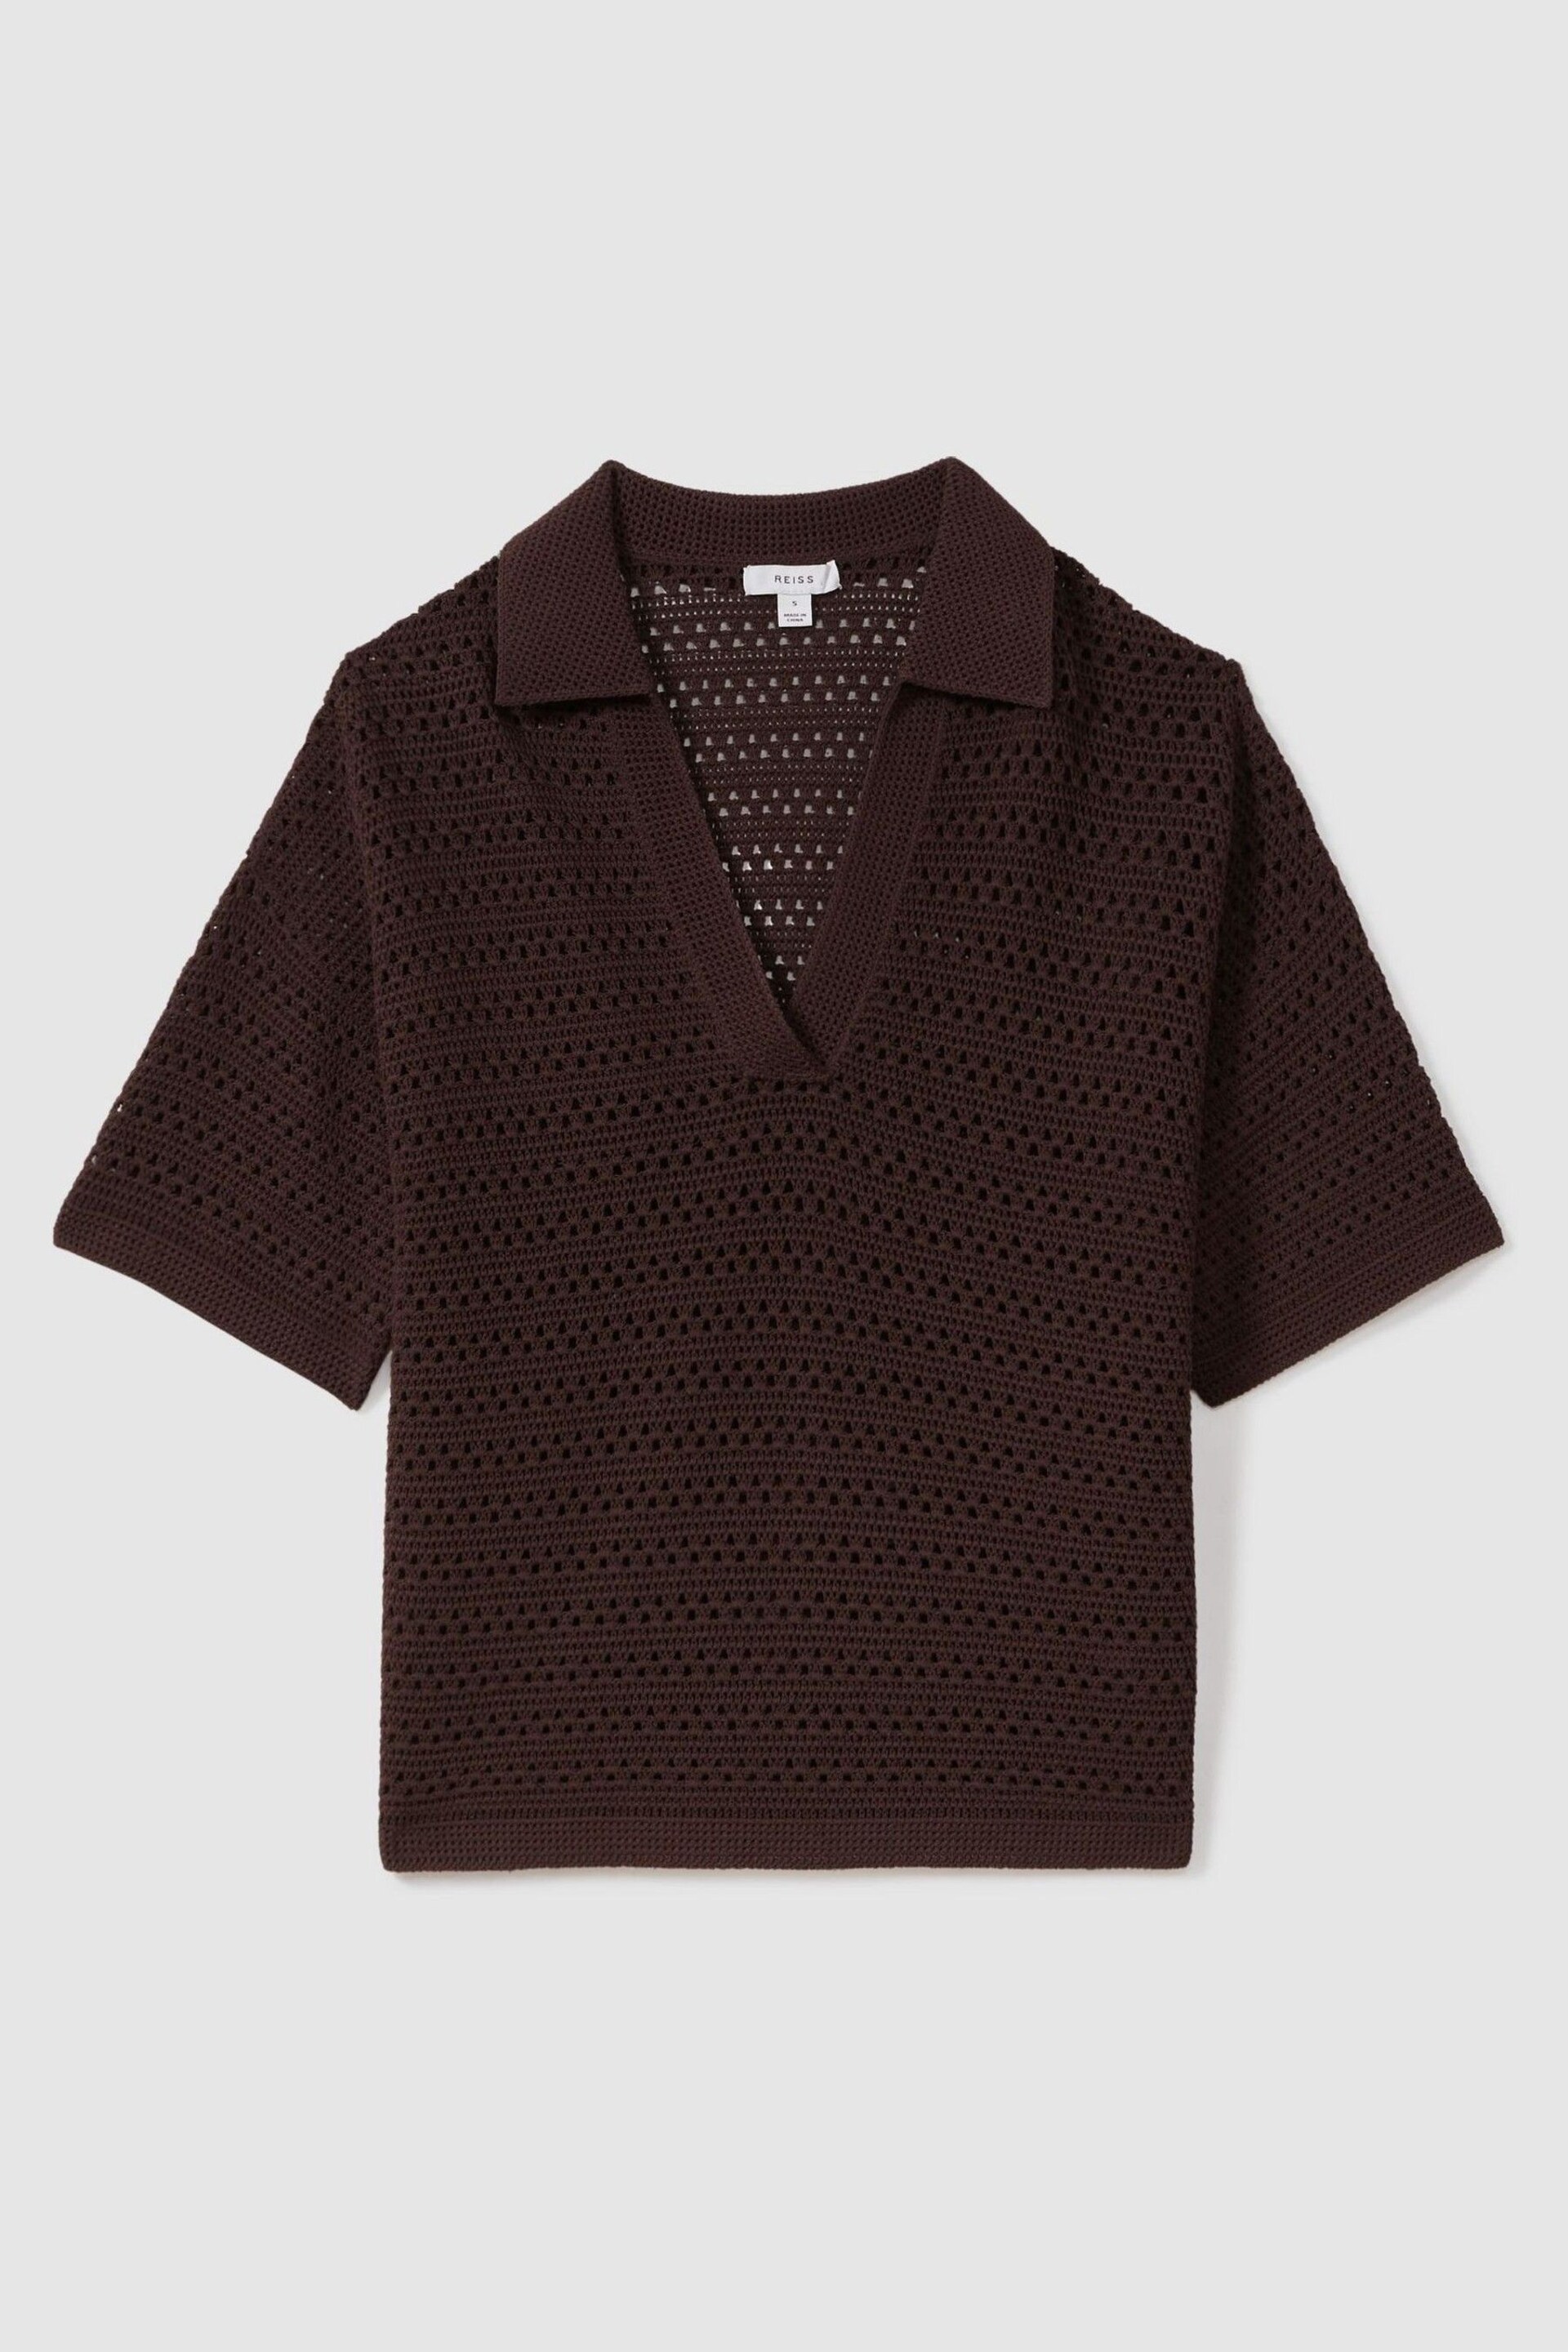 Reiss Chocolate Carla Knitted Open-Collar Polo Shirt - Image 2 of 5